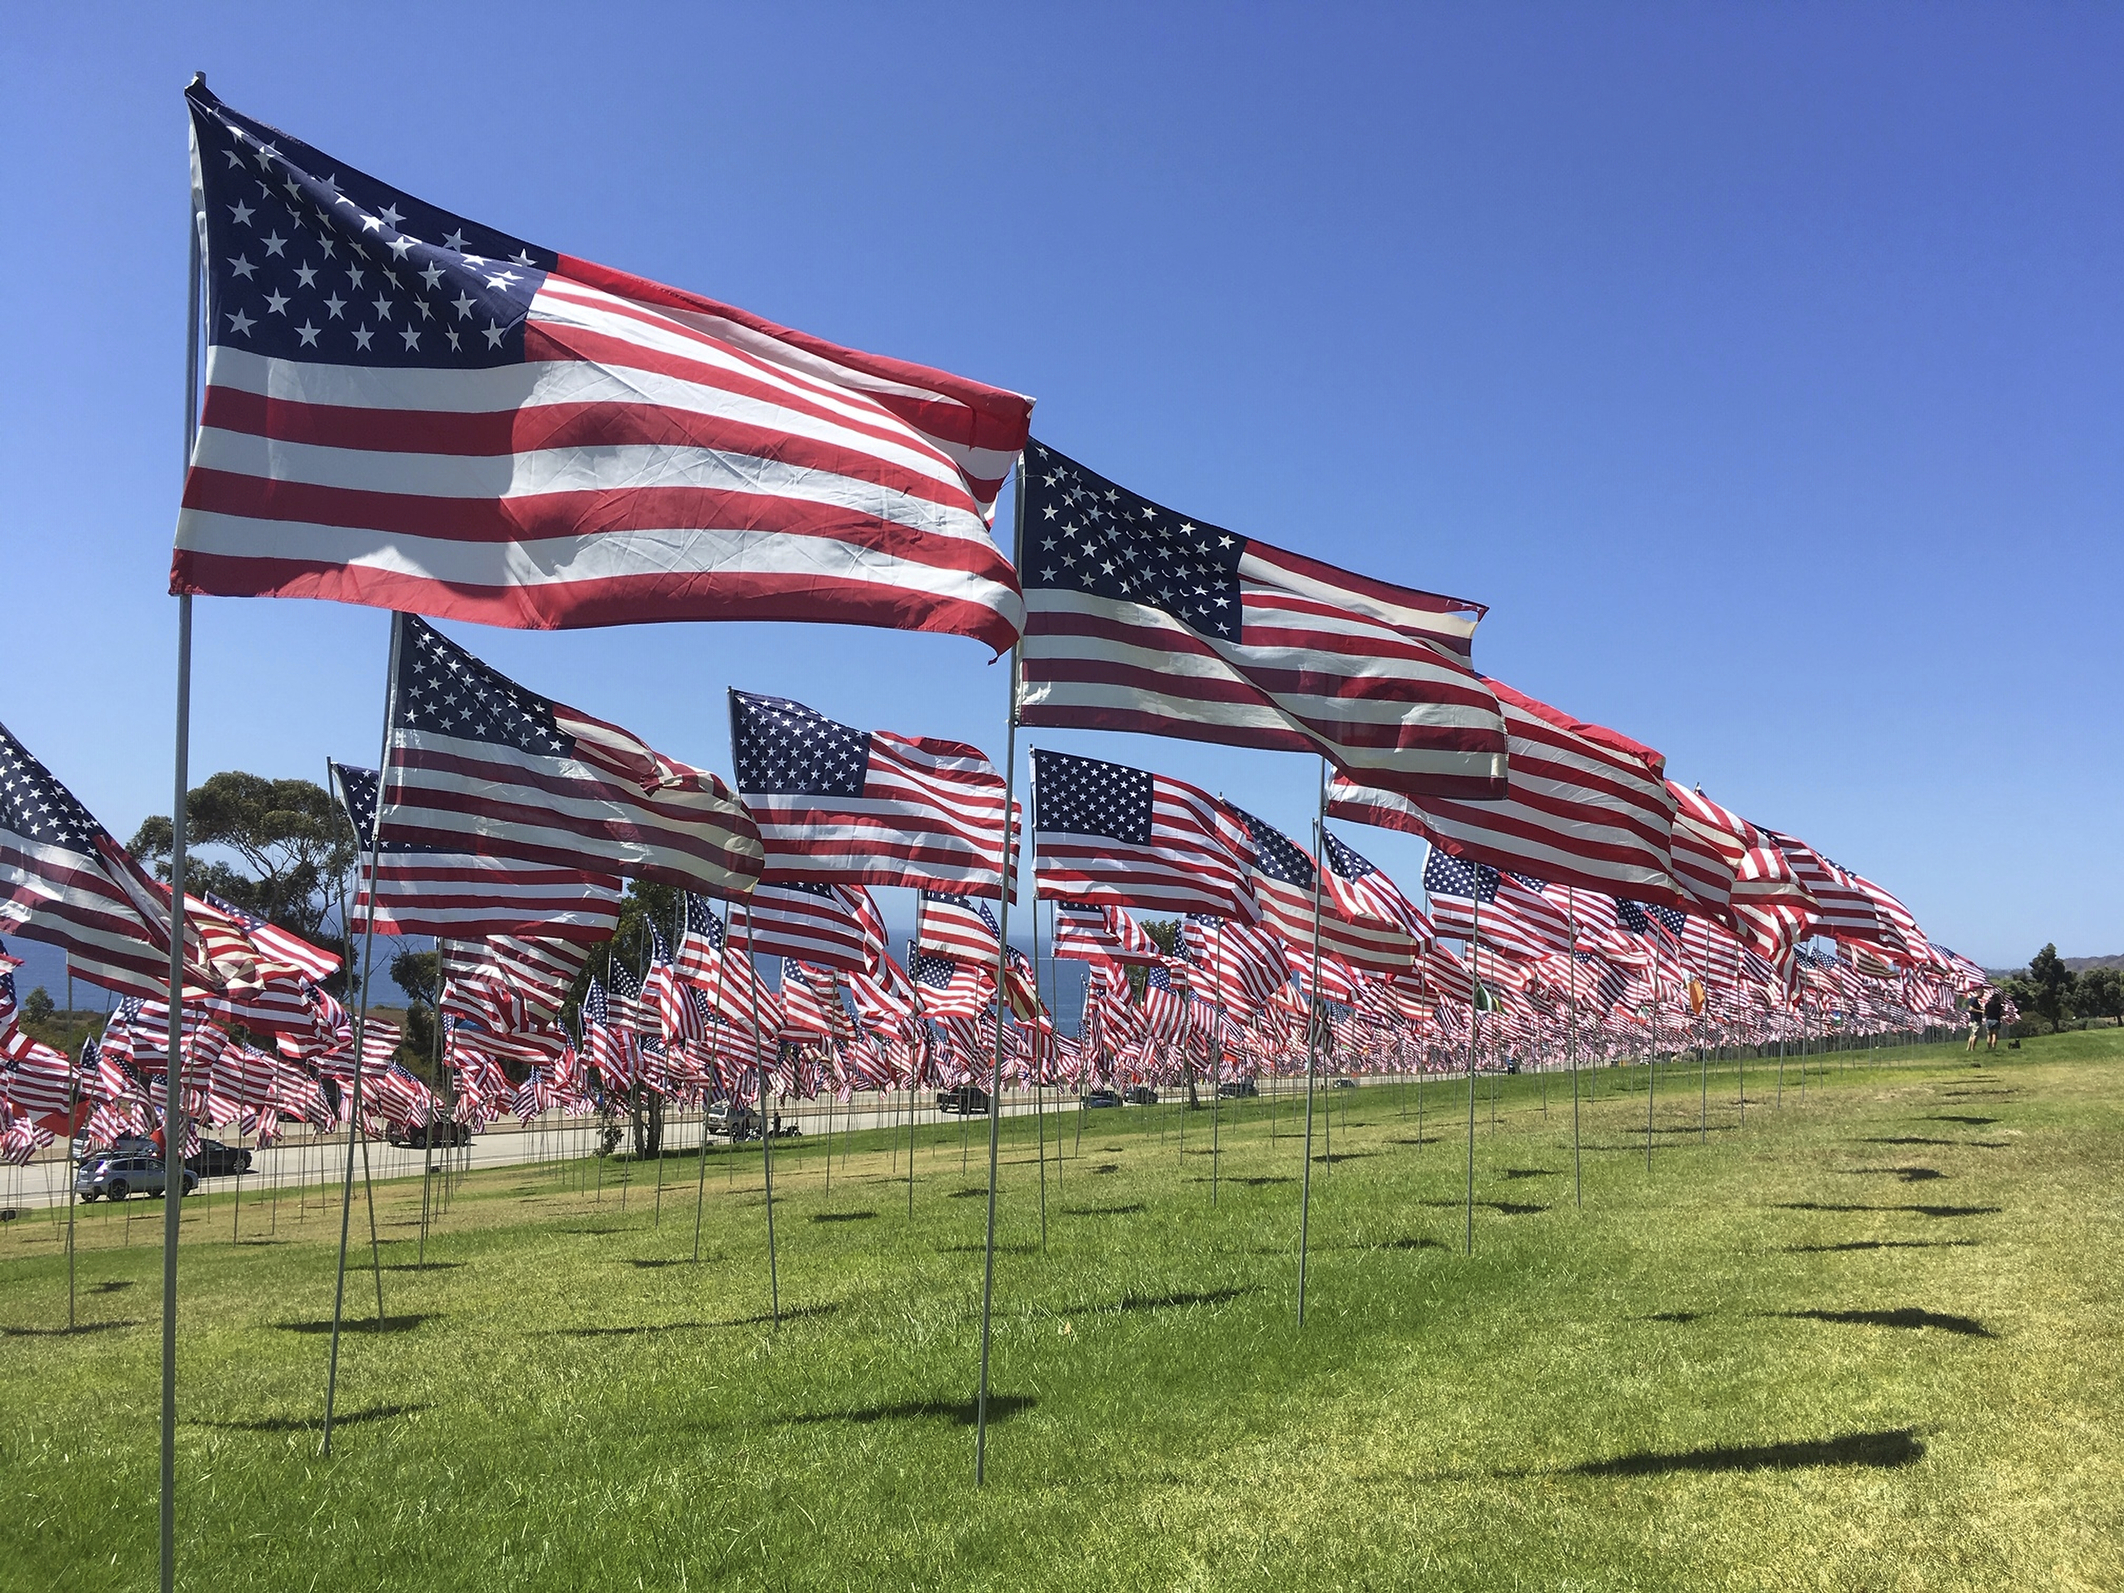 Thousands of flags representing each of the 9/11 terrorist attack victims wave.